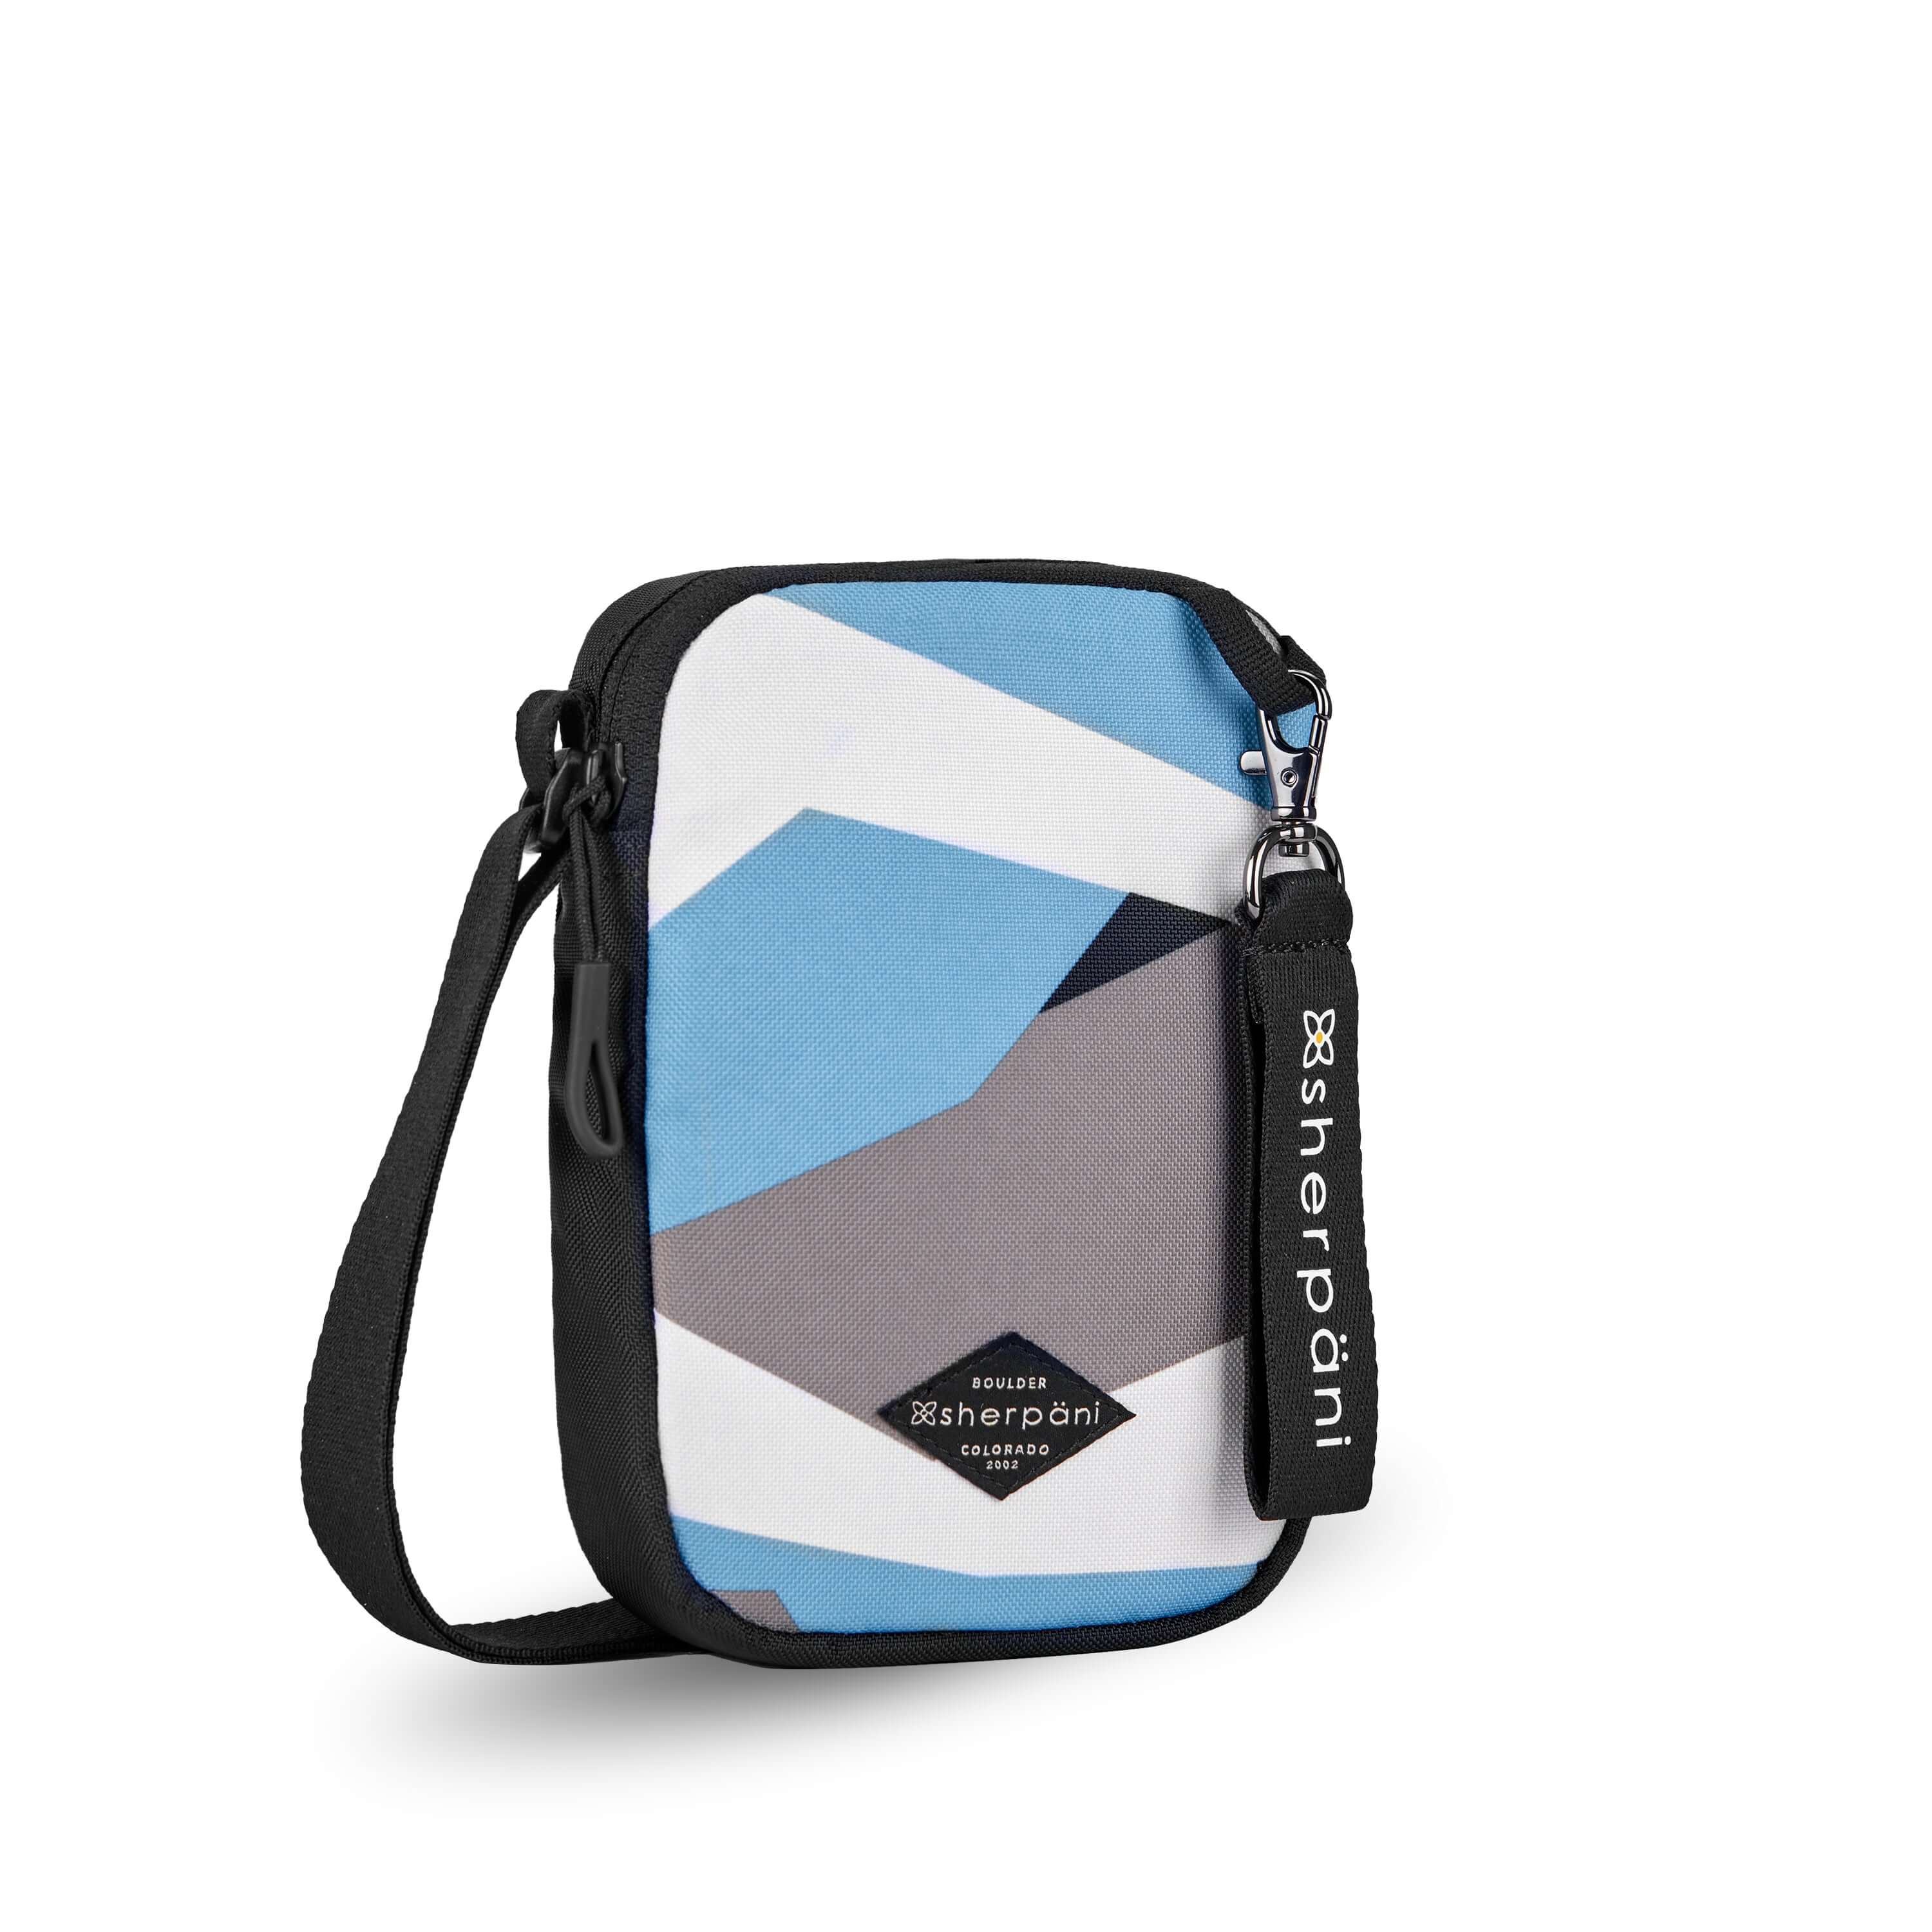 Angled front view of Sherpani crossbody, the Rogue in Summer Camo. The bag is two toned: the front is a camouflage pattern of light blue, gray and white, the back is black. The main zipper compartment features an easy-pull zipper accented in black. The bag has an adjustable crossbody strap. A branded Sherpani keychain is clipped to a fabric loop on the top right corner.